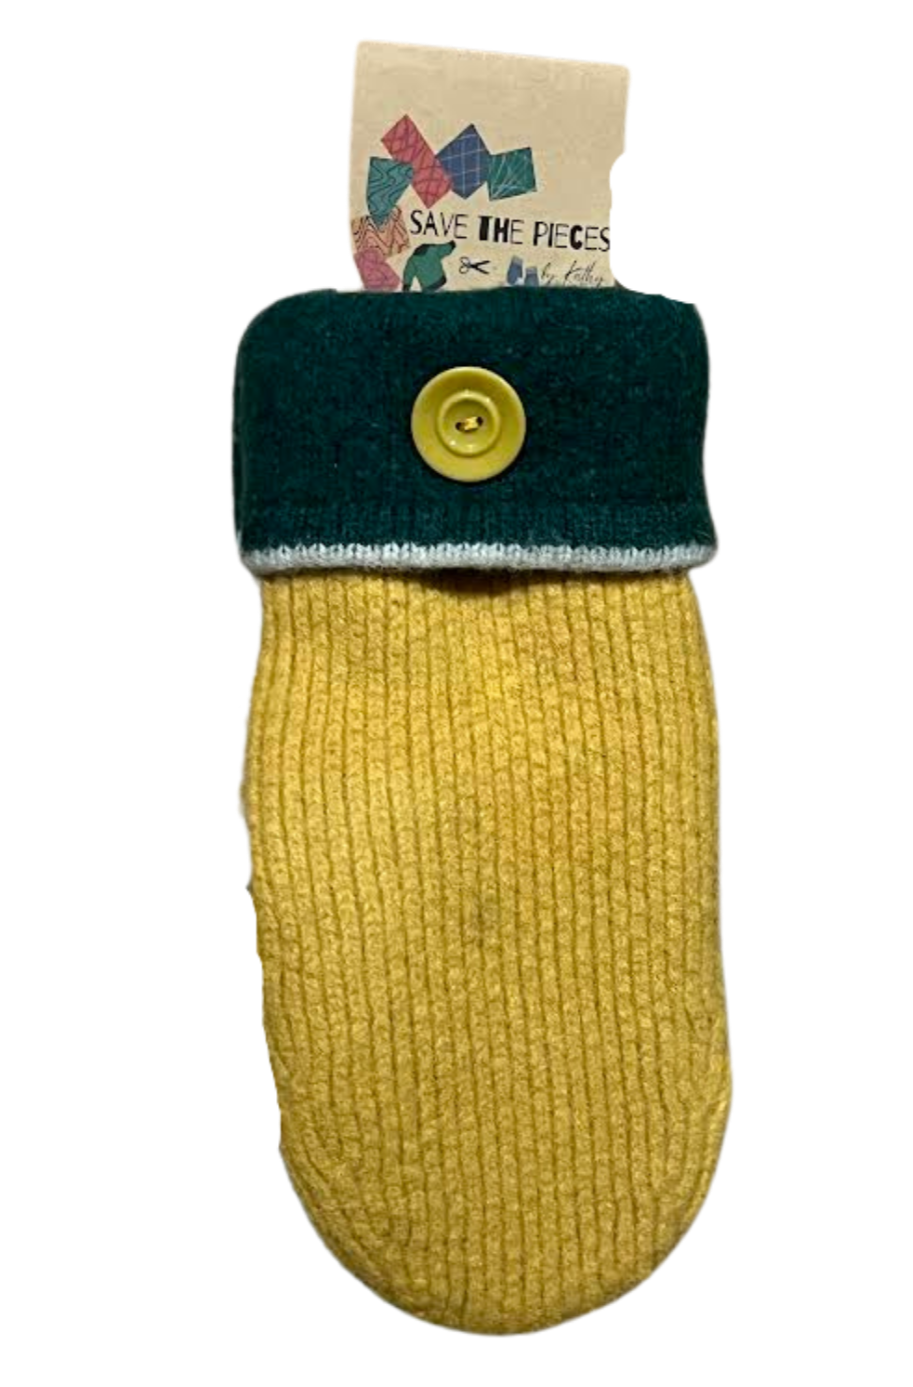 Save The Pieces Wool Mittens - yellow / green